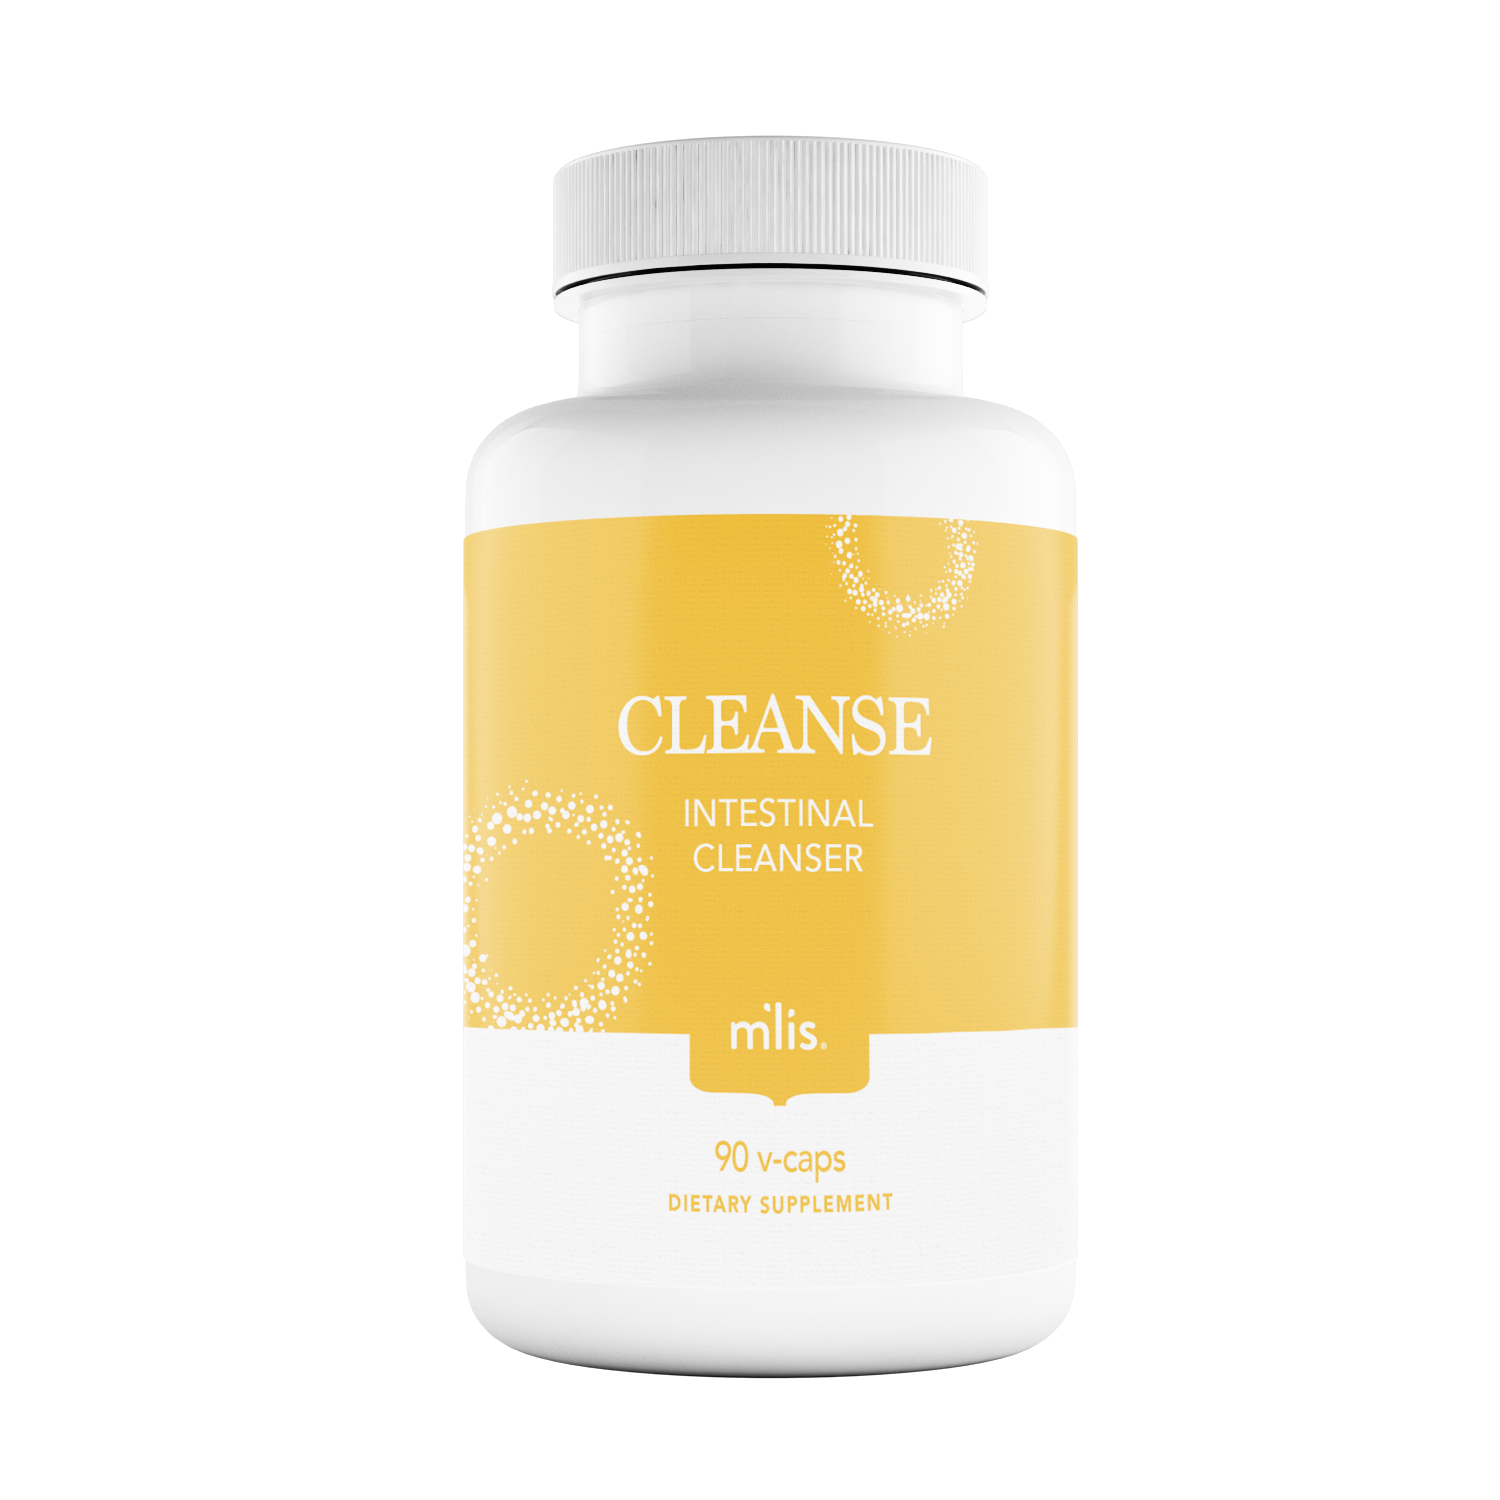 CLEANSE Intestinal Cleanser